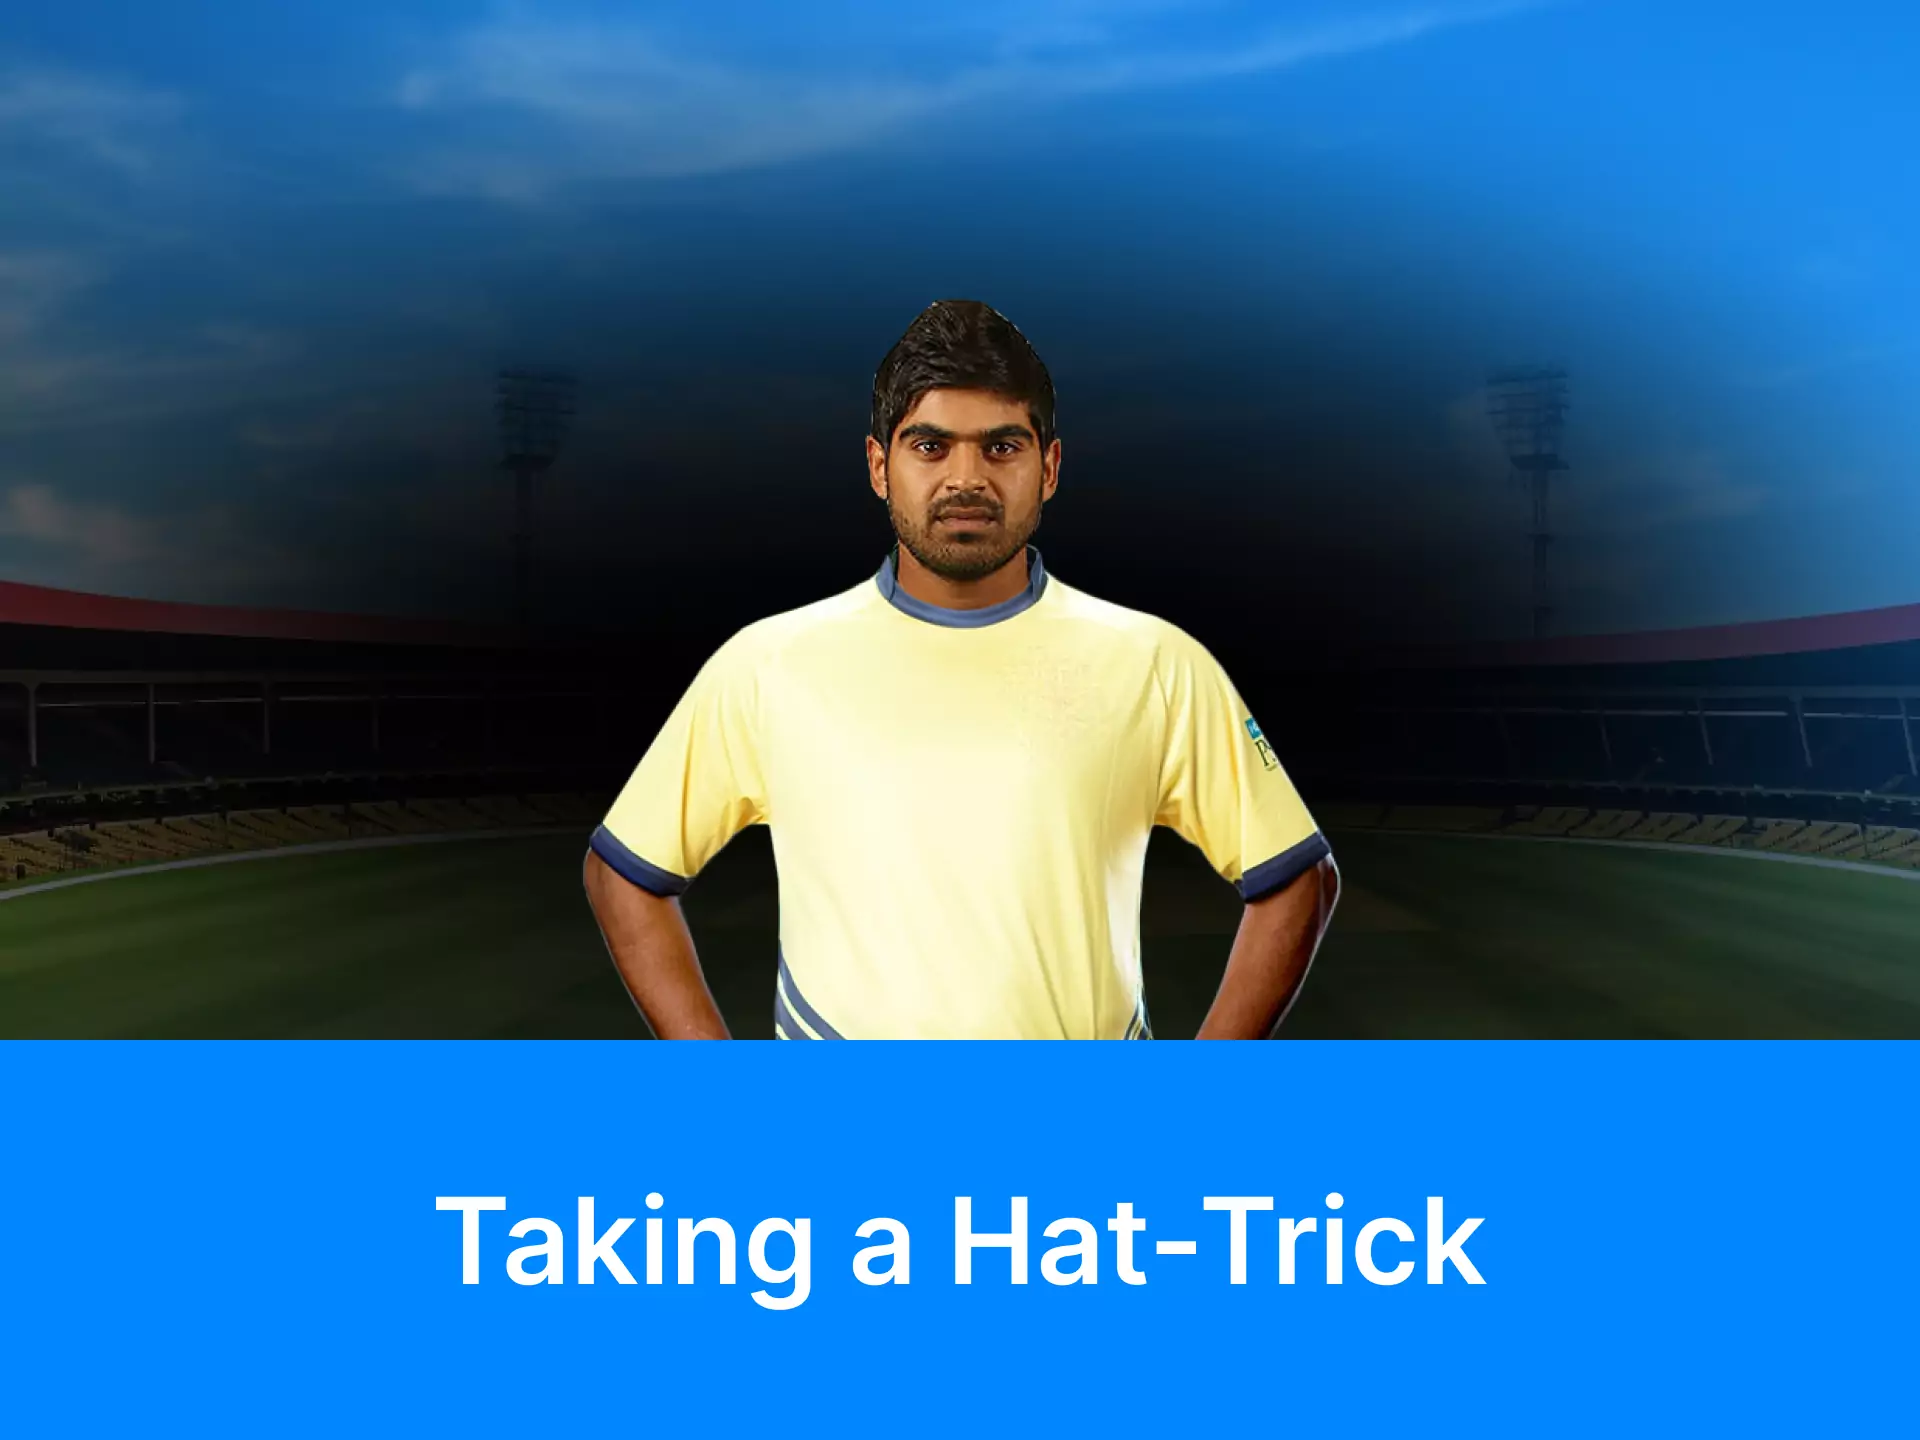 Find out why a hat-trick in the game of cricket is so appreciated and expected.